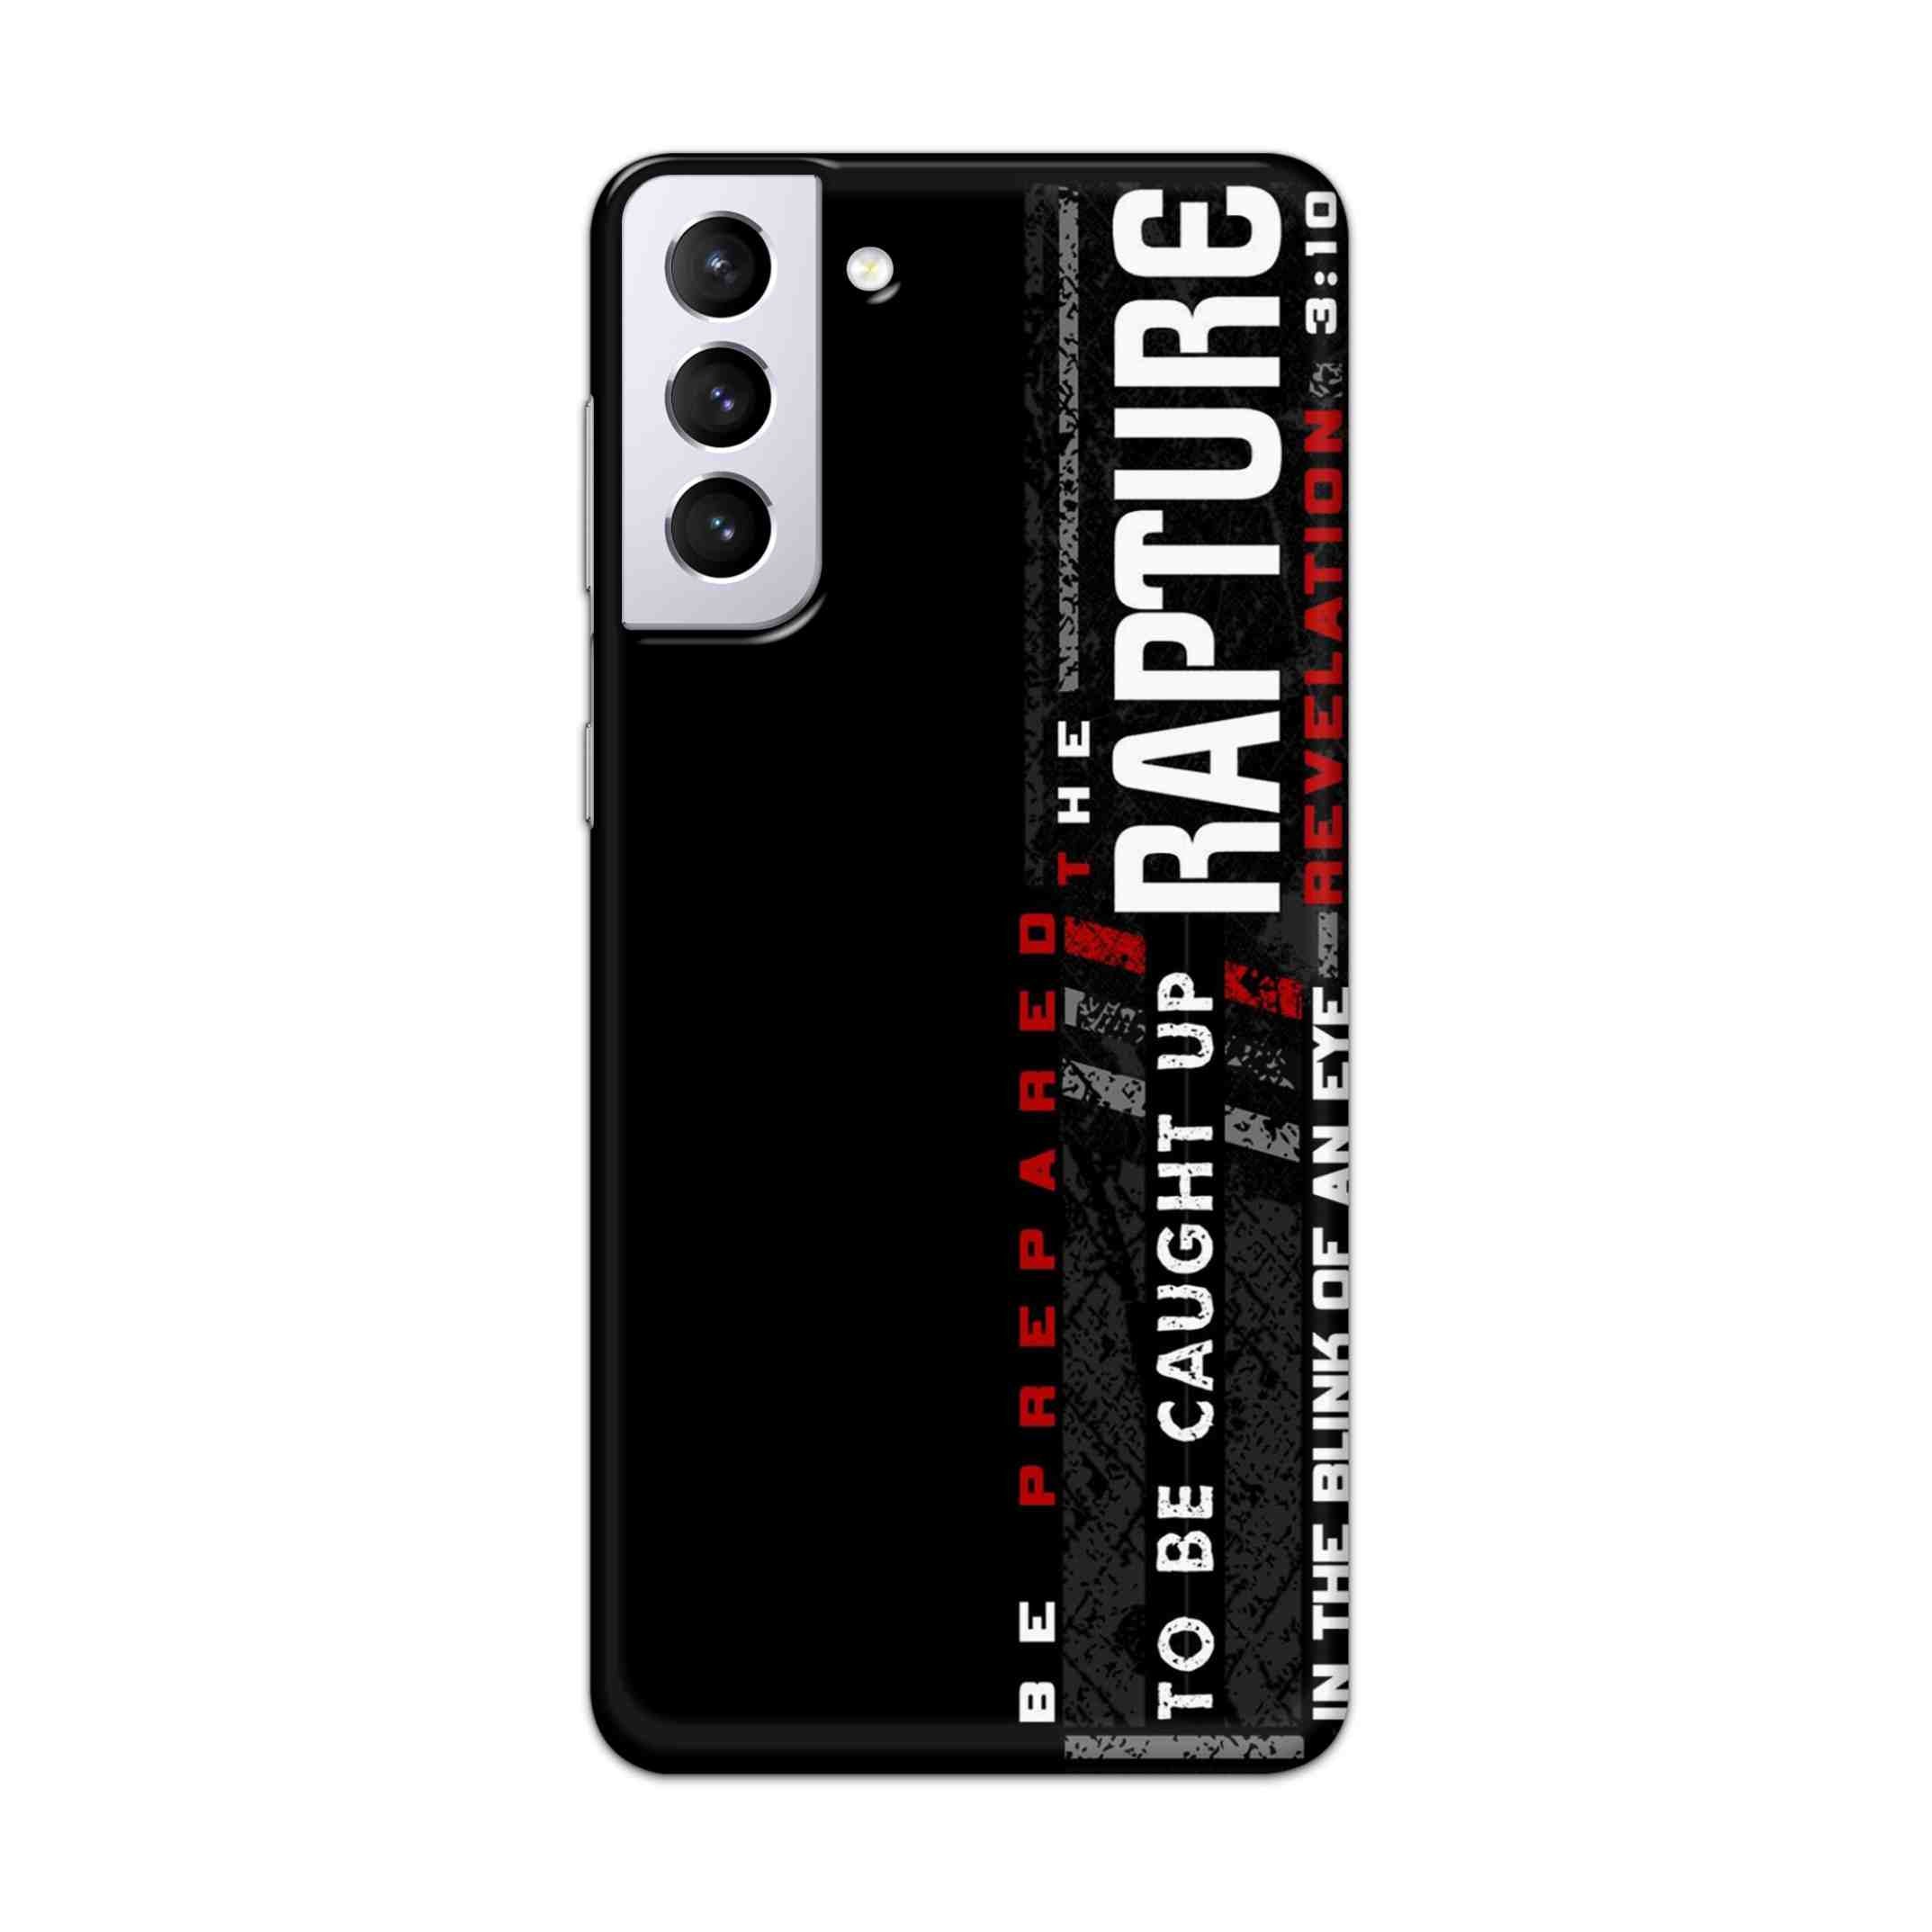 Buy Rapture Hard Back Mobile Phone Case Cover For Samsung Galaxy S21 Plus Online